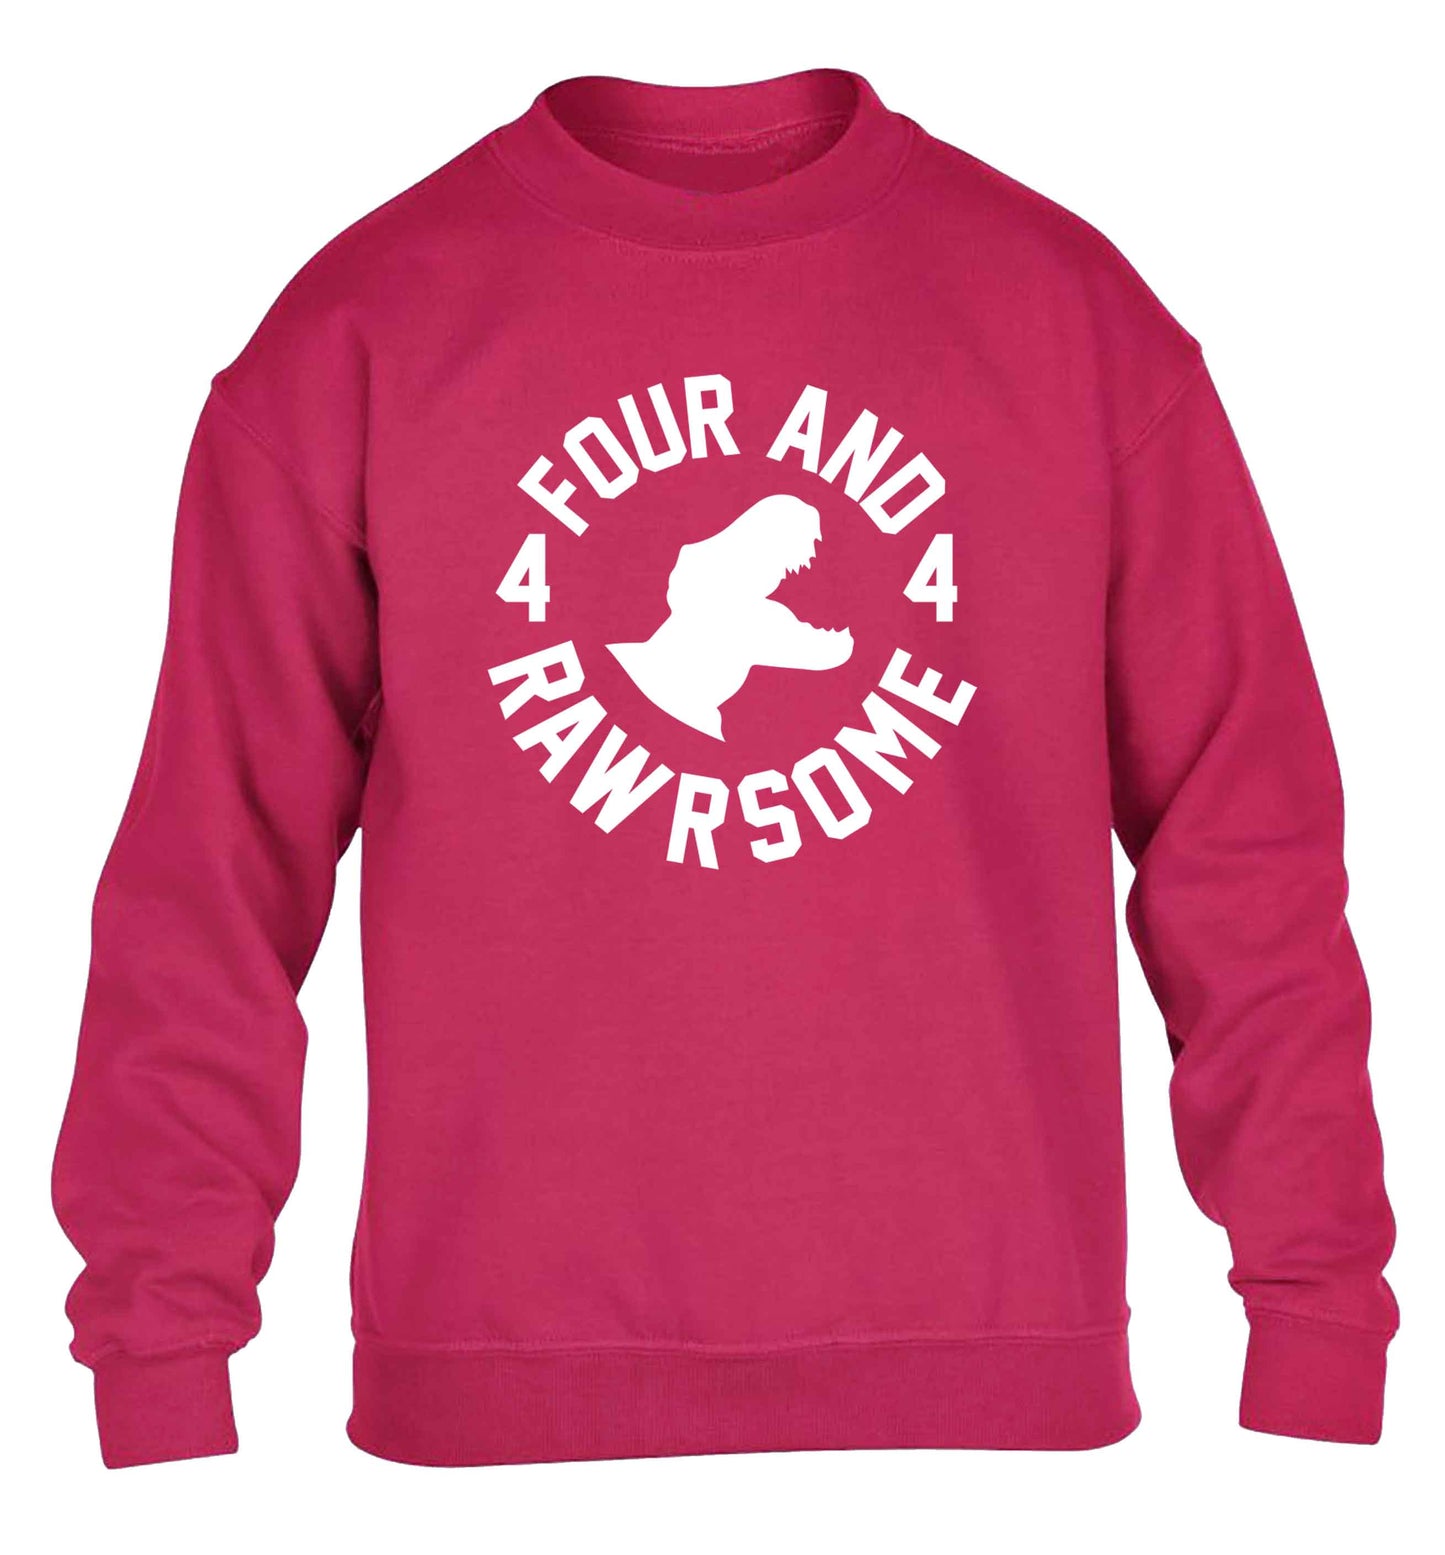 Four and rawrsome children's pink sweater 12-13 Years